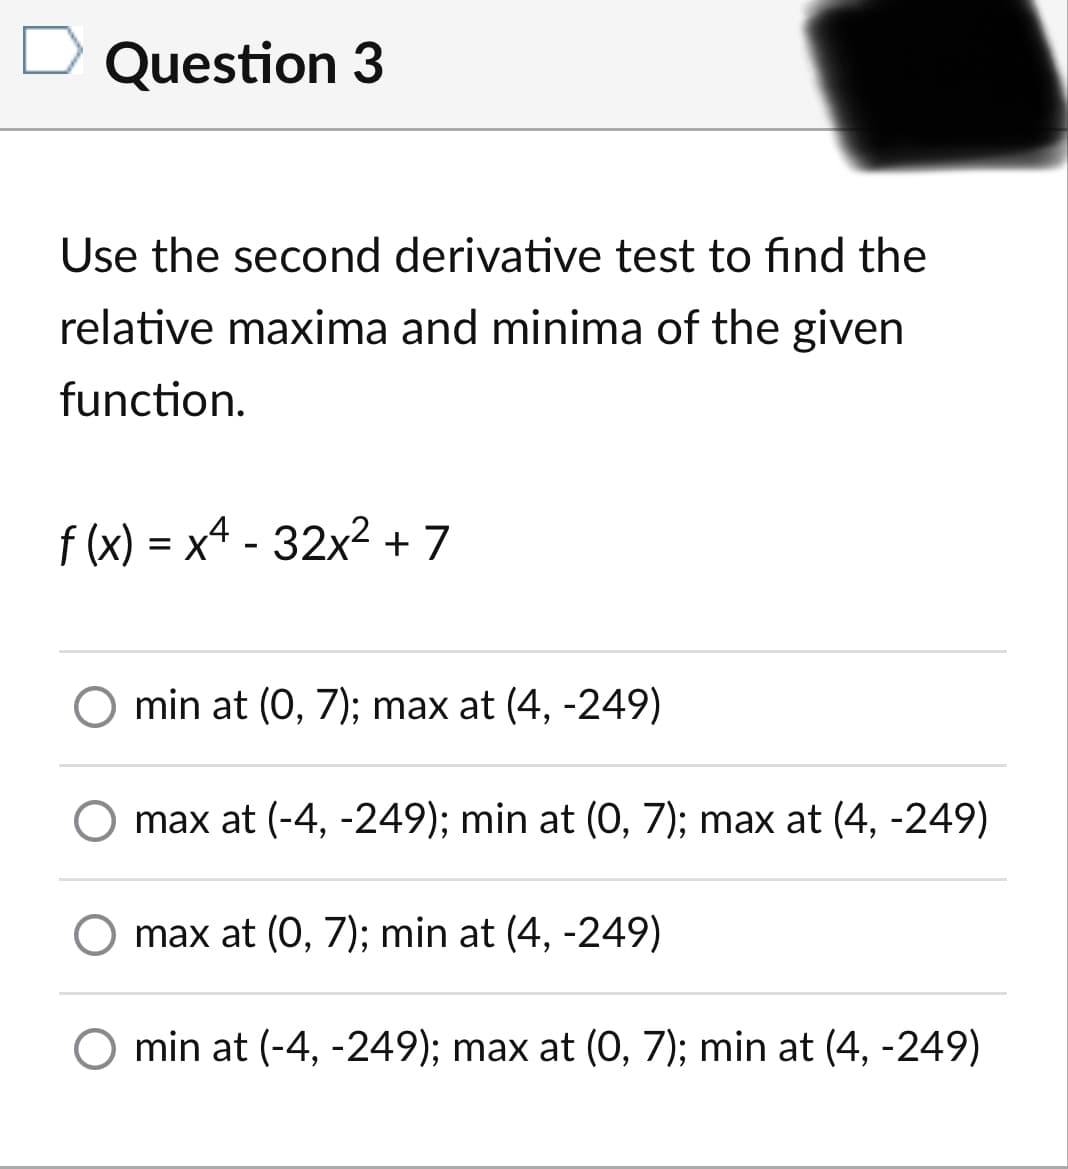 Question 3
Use the second derivative test to find the
relative maxima and minima of the given
function.
f (x) = x4 - 32x? + 7
O min at (0, 7); max at (4, -249)
O max at (-4, -249); min at (O, 7); max at (4, -249)
O max at (0, 7); min at (4, -249)
min at (-4, -249); max at (0, 7); min at (4, -249)
6.
